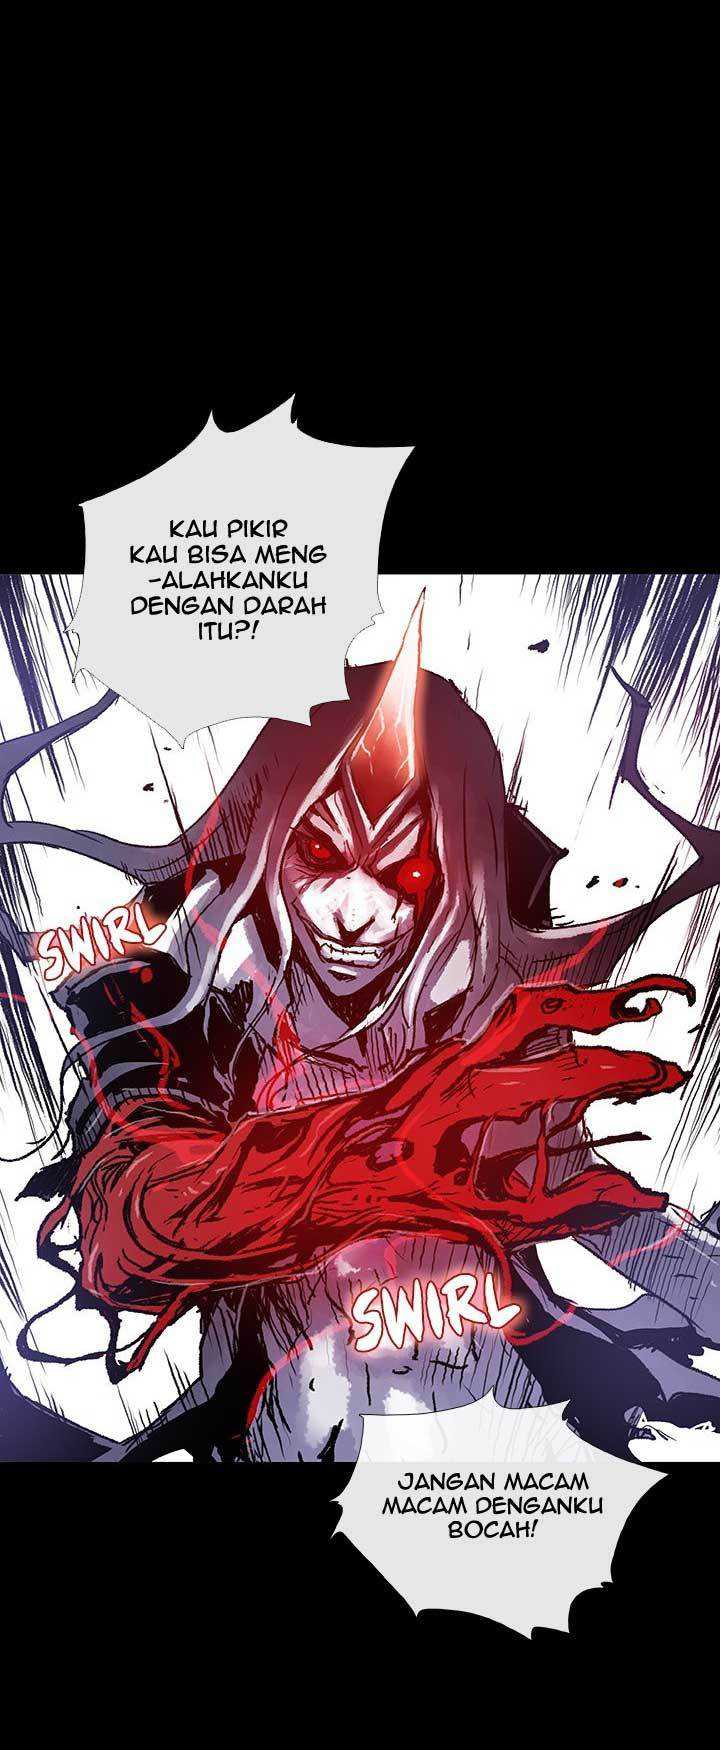 Blood Blade Chapter 04